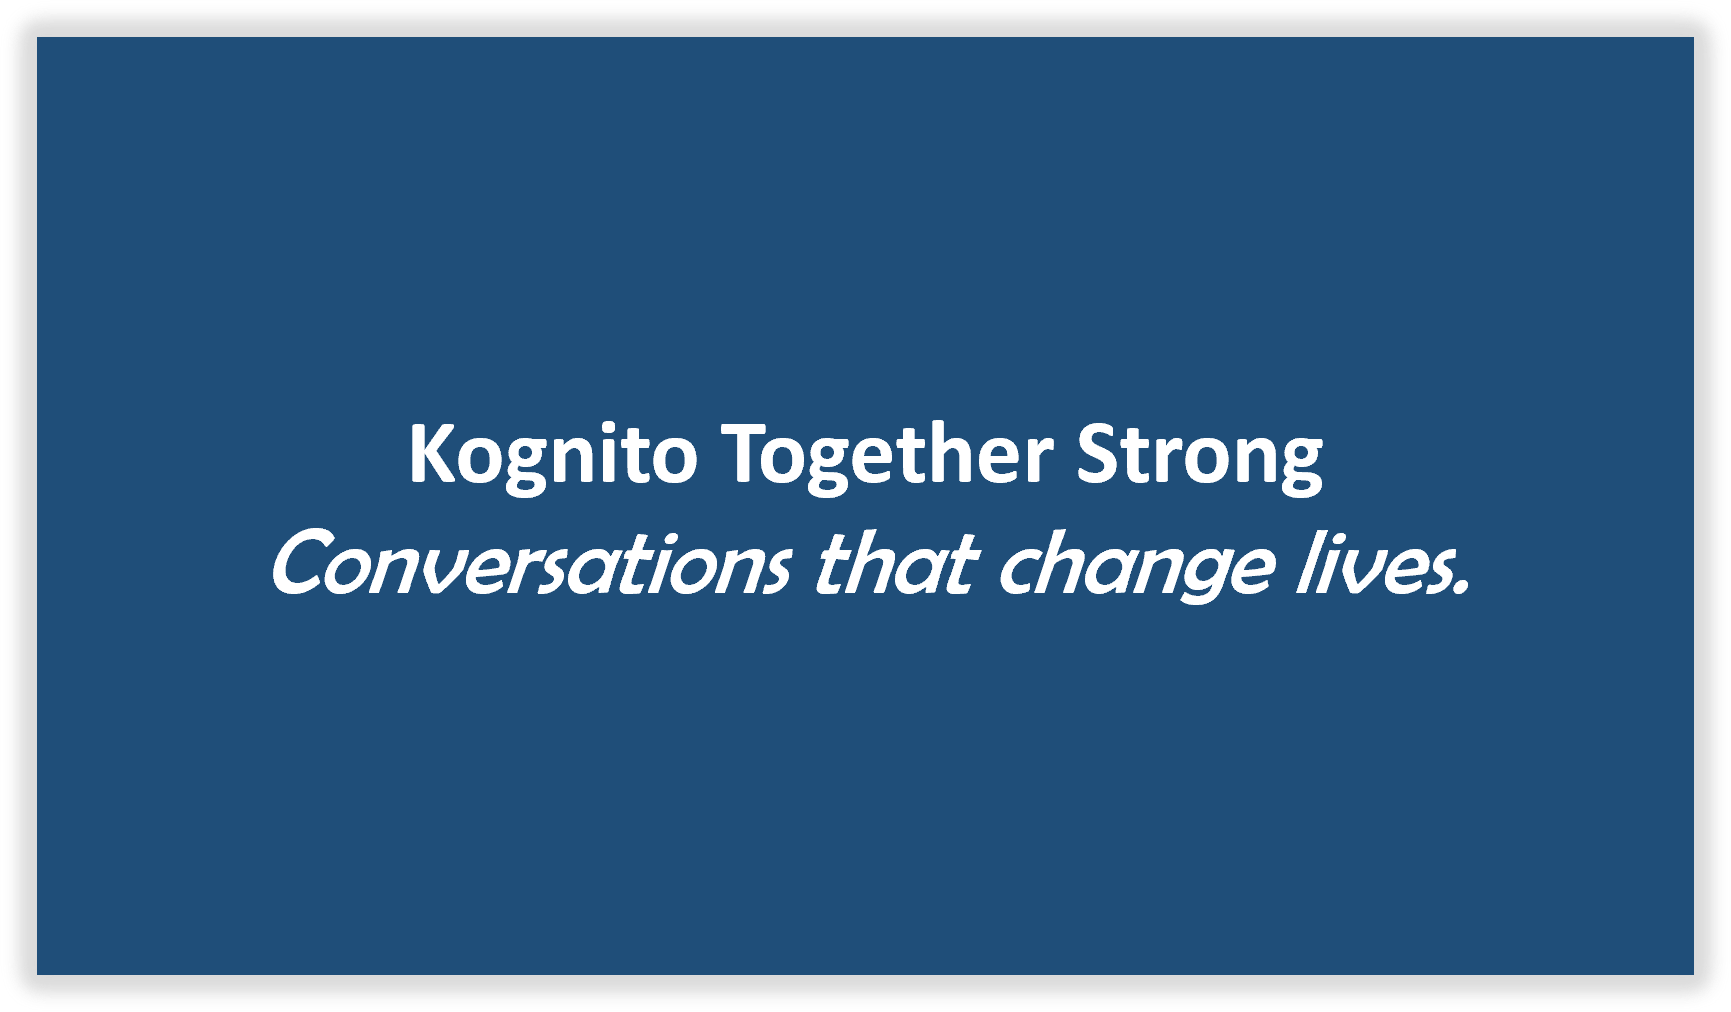 Kognito Together Strong